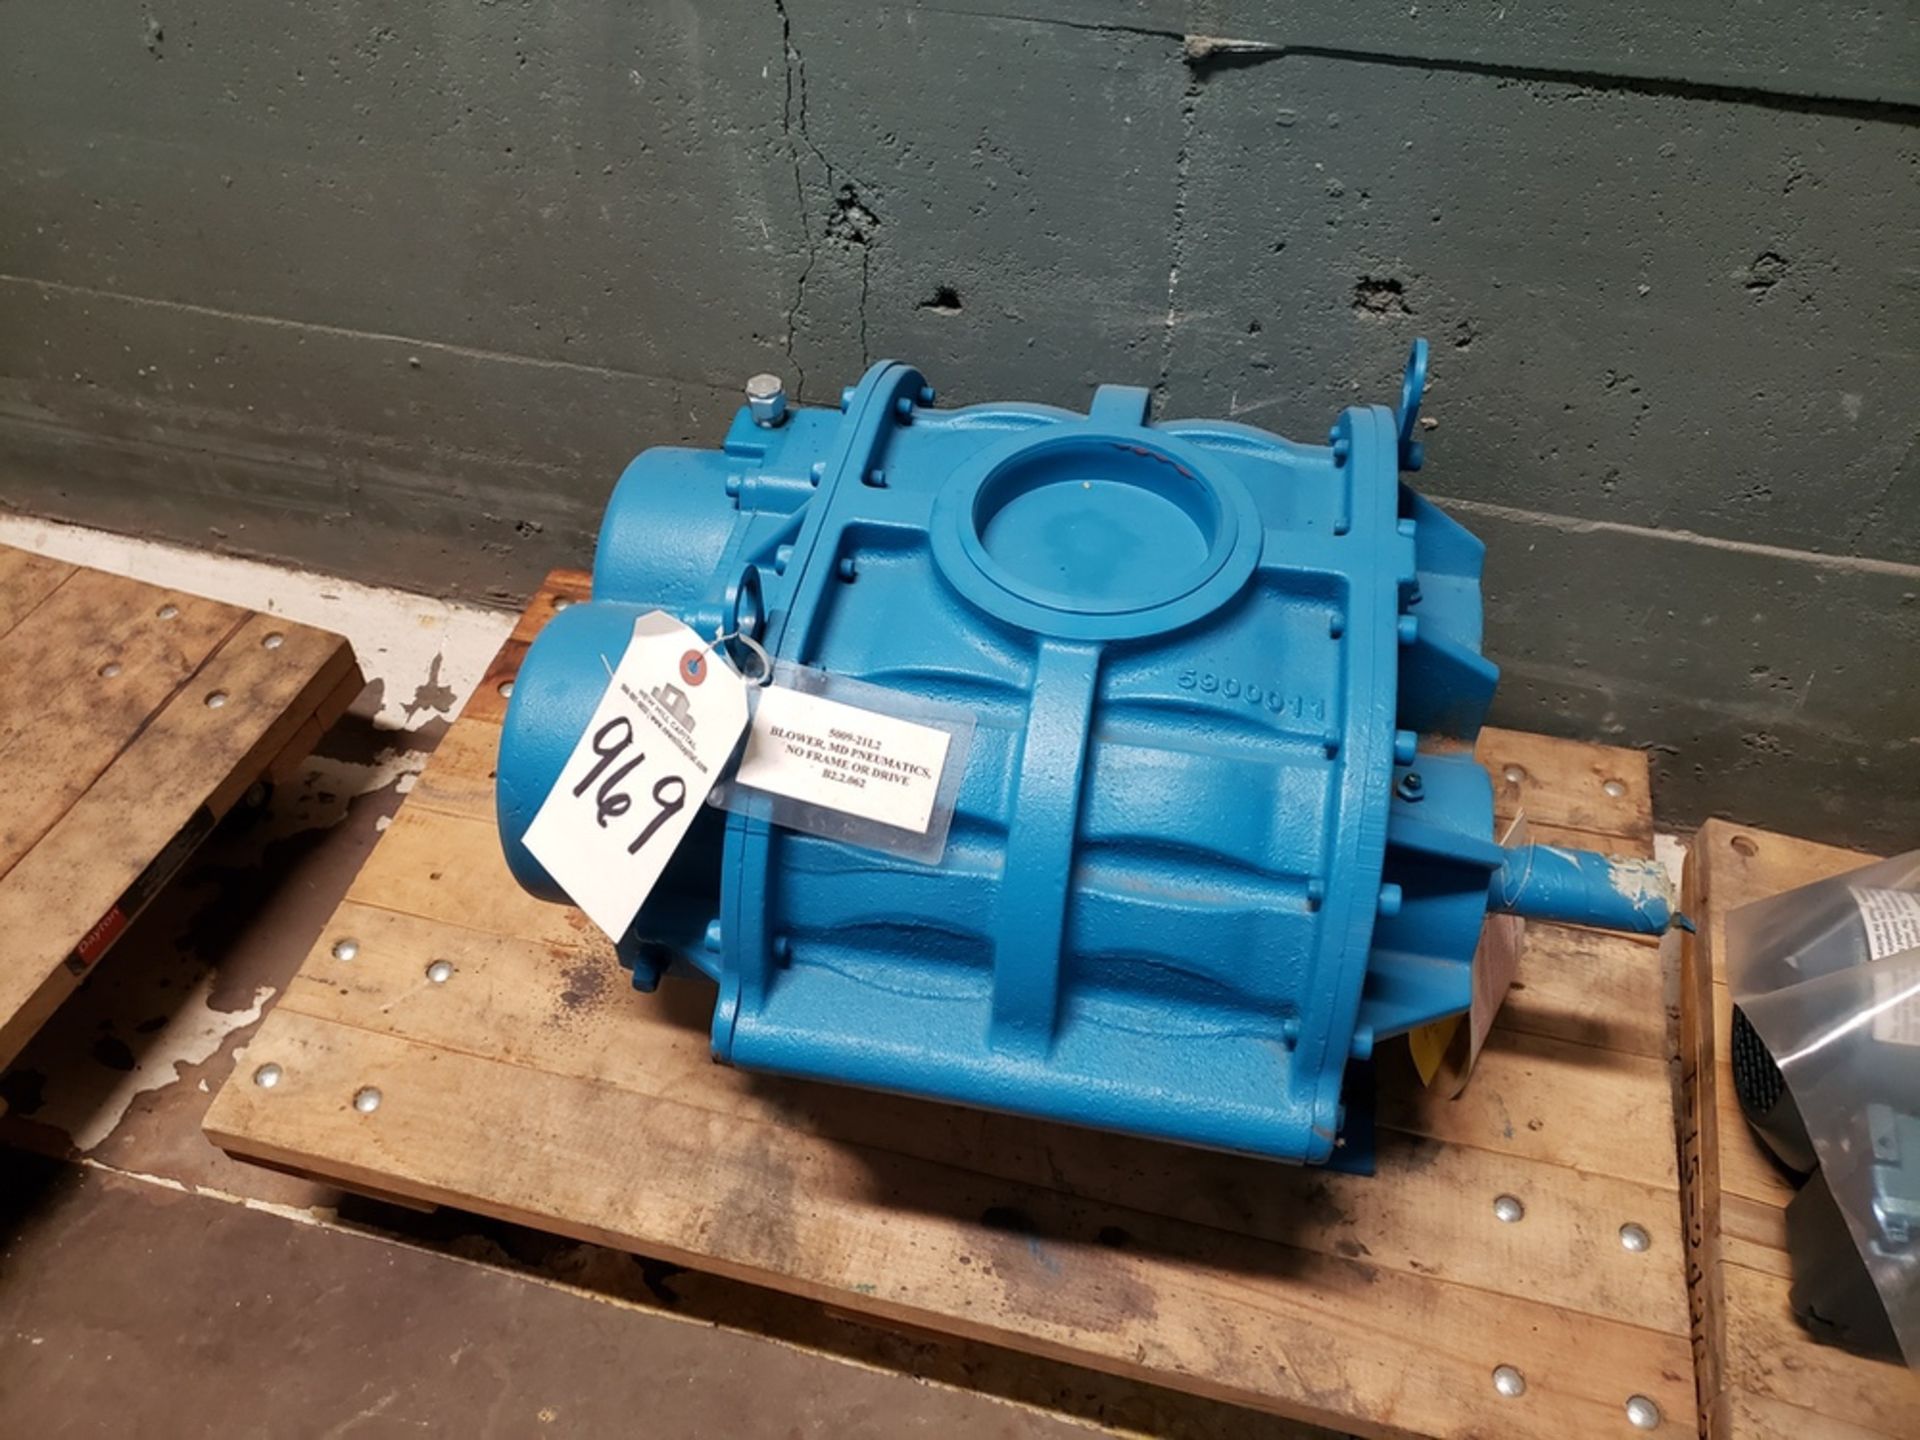 Tuthill Rotary Positive Displacement Blower, M# 5009-21L2 - Subject to Bulk Bid Lot | Rig Fee: $50